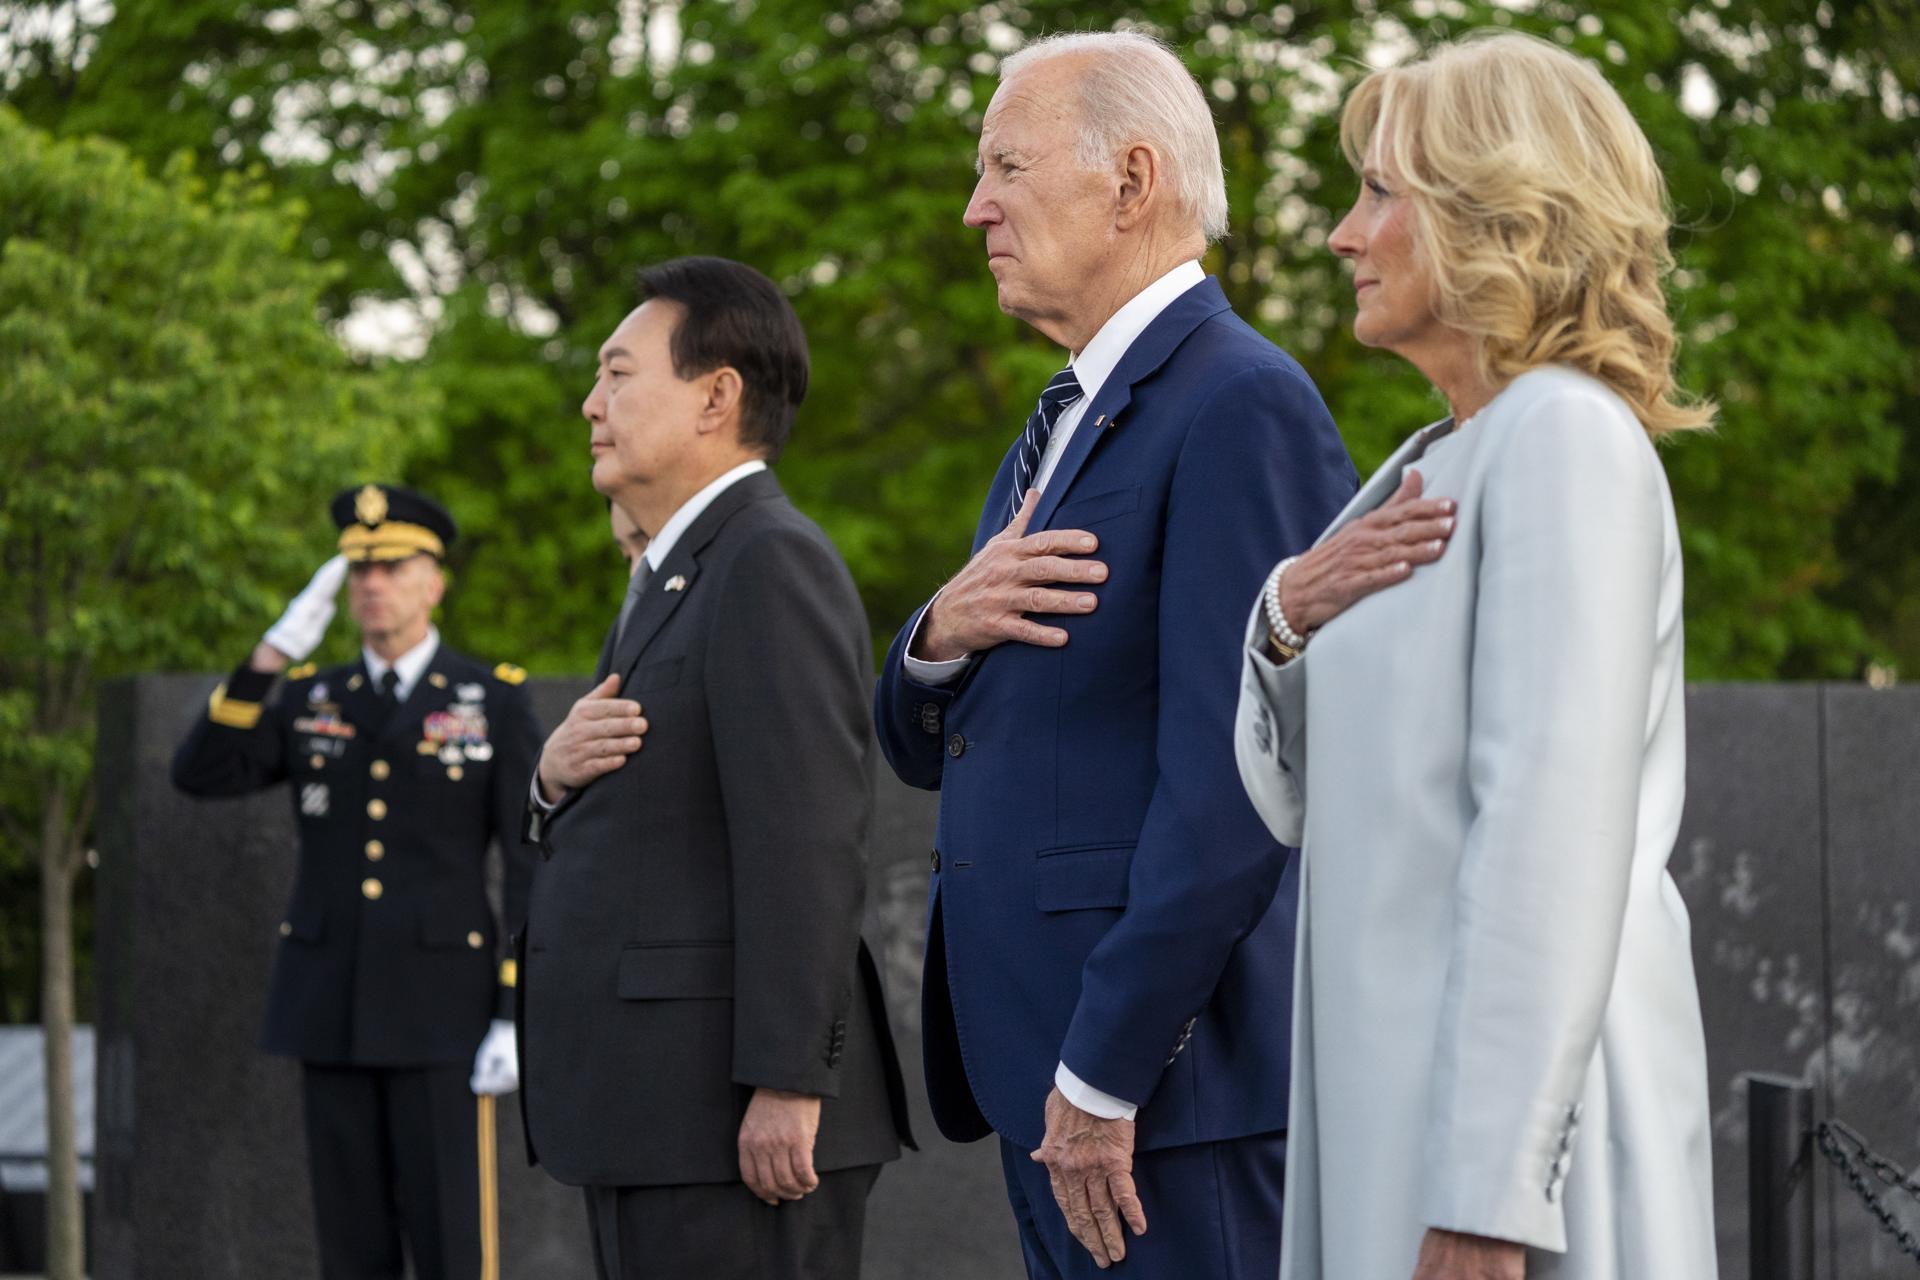 US President Joe Biden (2-R) and First Lady Jill Biden (R) participate in a wreath laying ceremony with South Korea President Yoon Suk Yeol (3-R) and First Lady Kim Keon Hee at the Korean War Veterans Memorial, in Washington, DC, USA, 25 April 2023. EFE/EPA/SHAWN THEW
